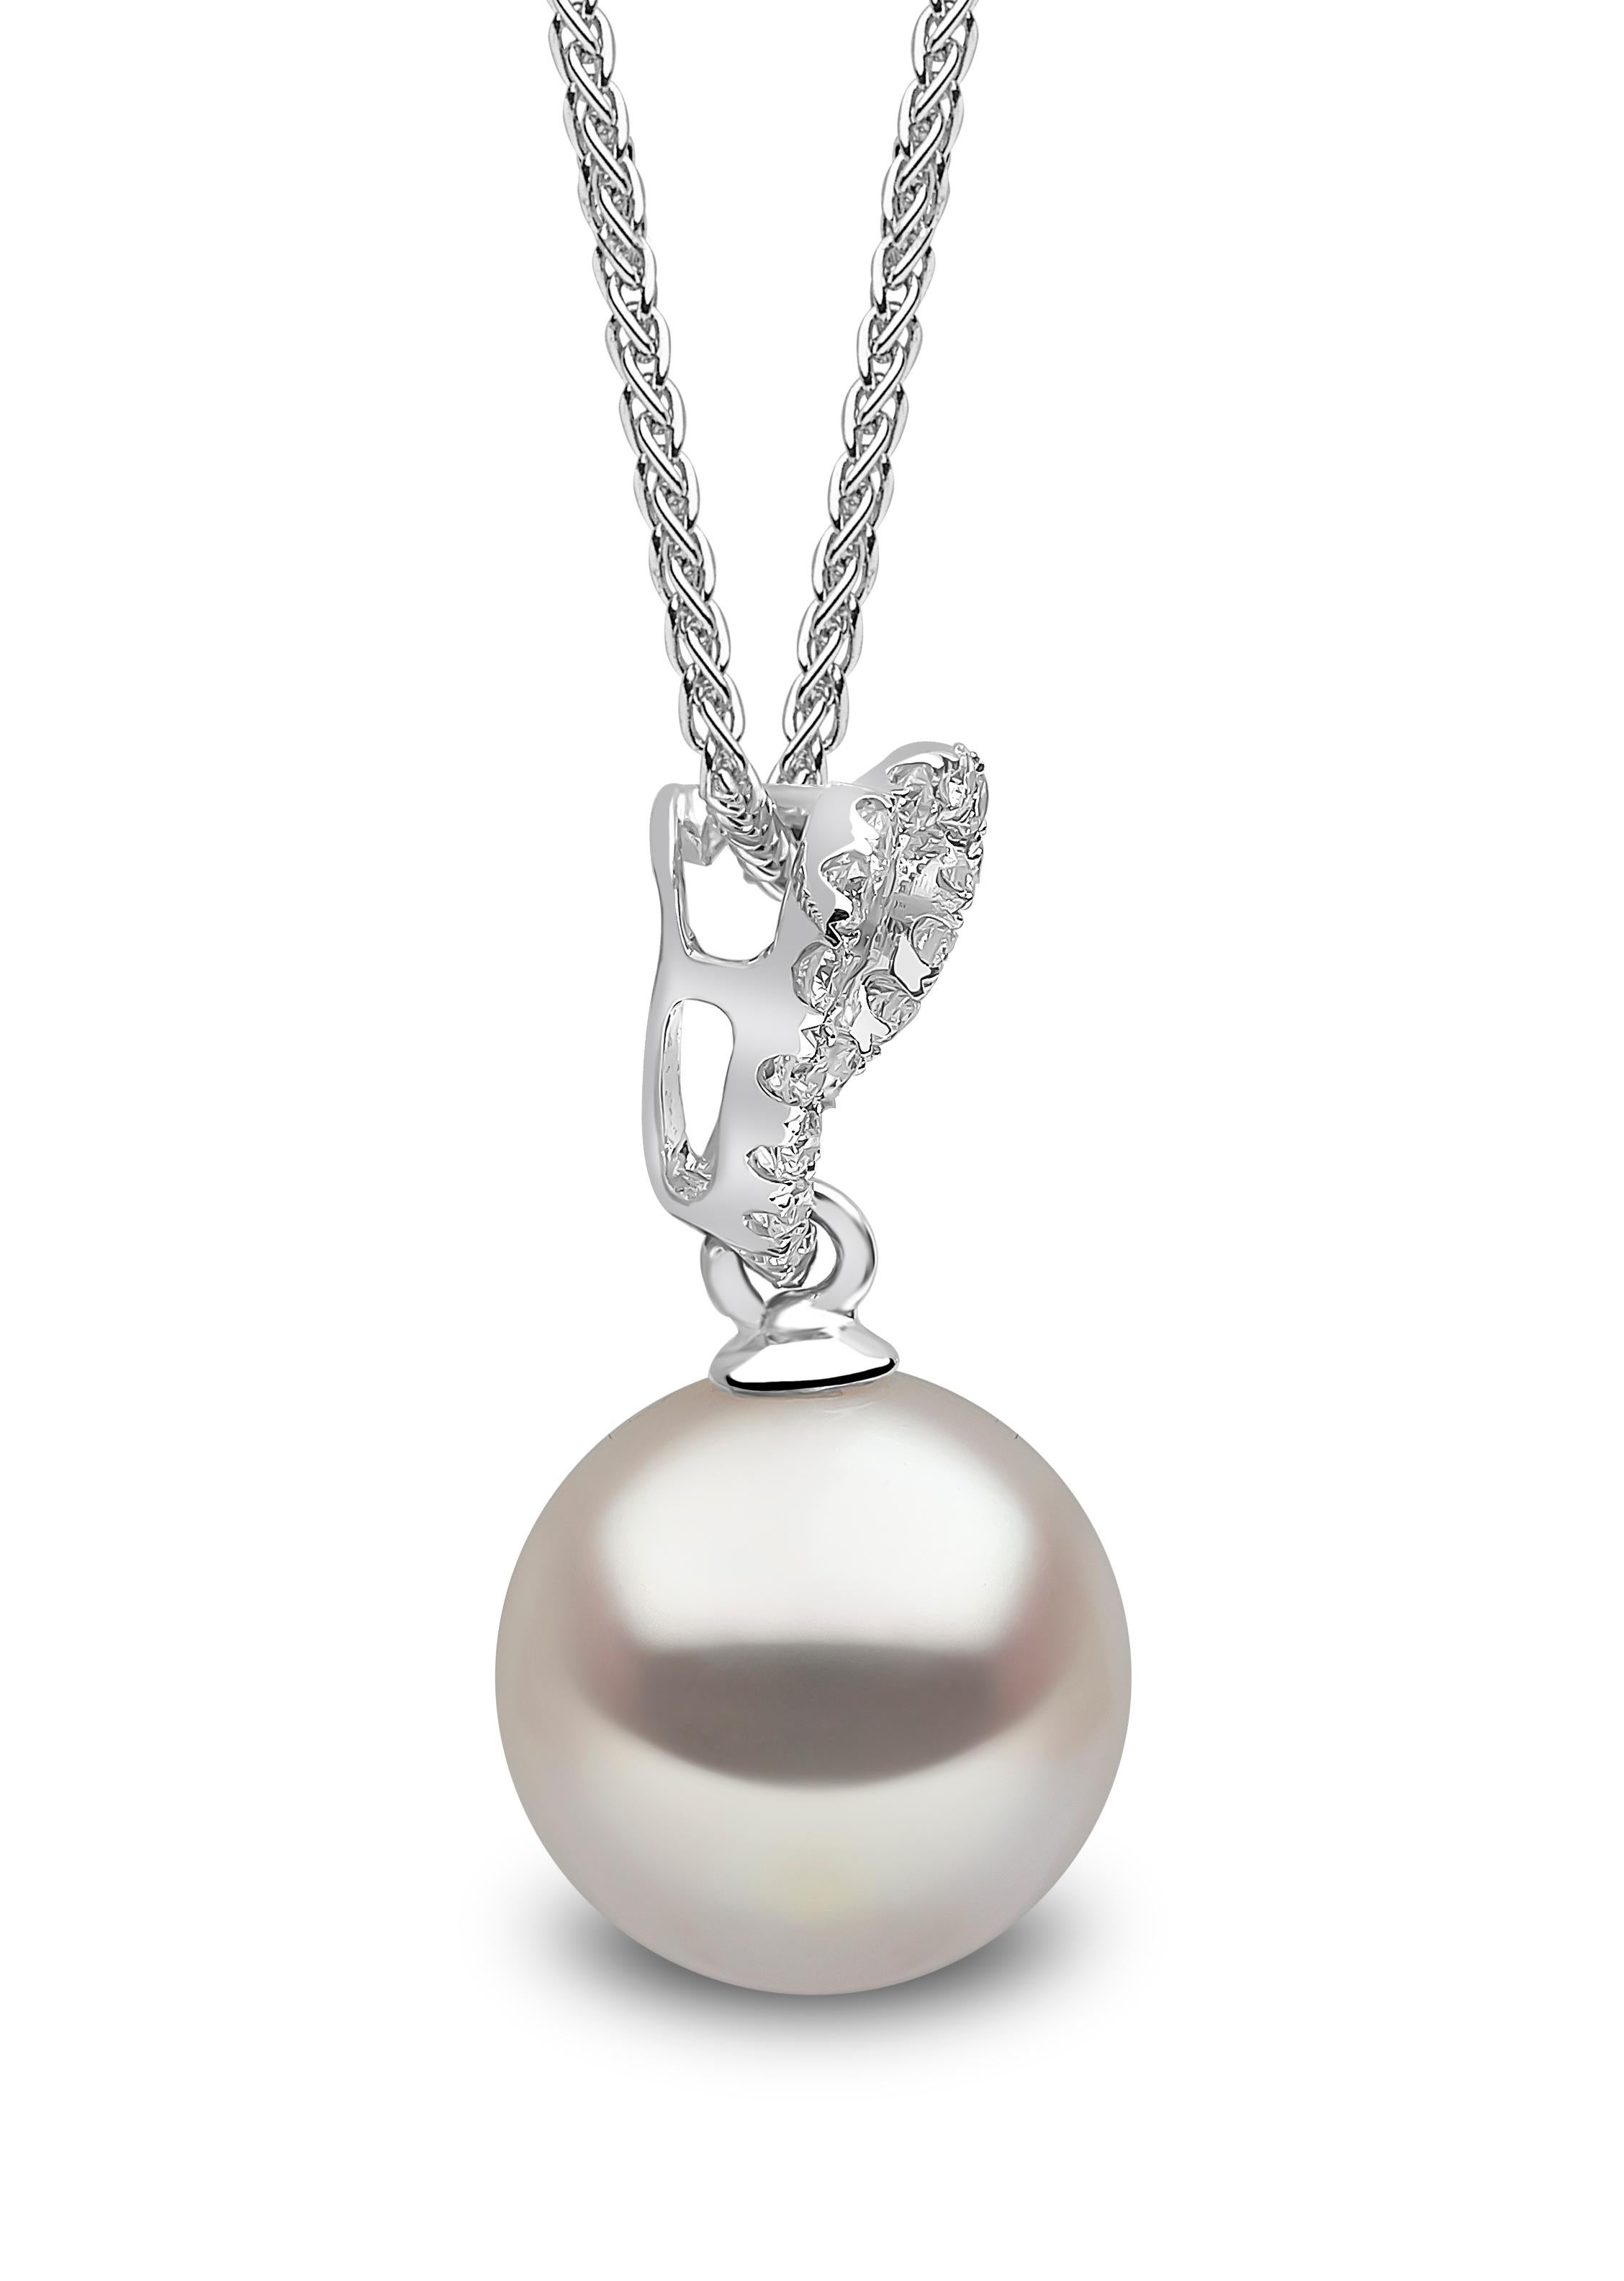 This sweet pendant by Yoko London features a lustrous freshwater pearl beneath a diamond heart-motif. Set in 18 Karat white gold to enhance the lustre of the pearl and the sparkle of the diamonds. This beautiful pendant would make a romantic and